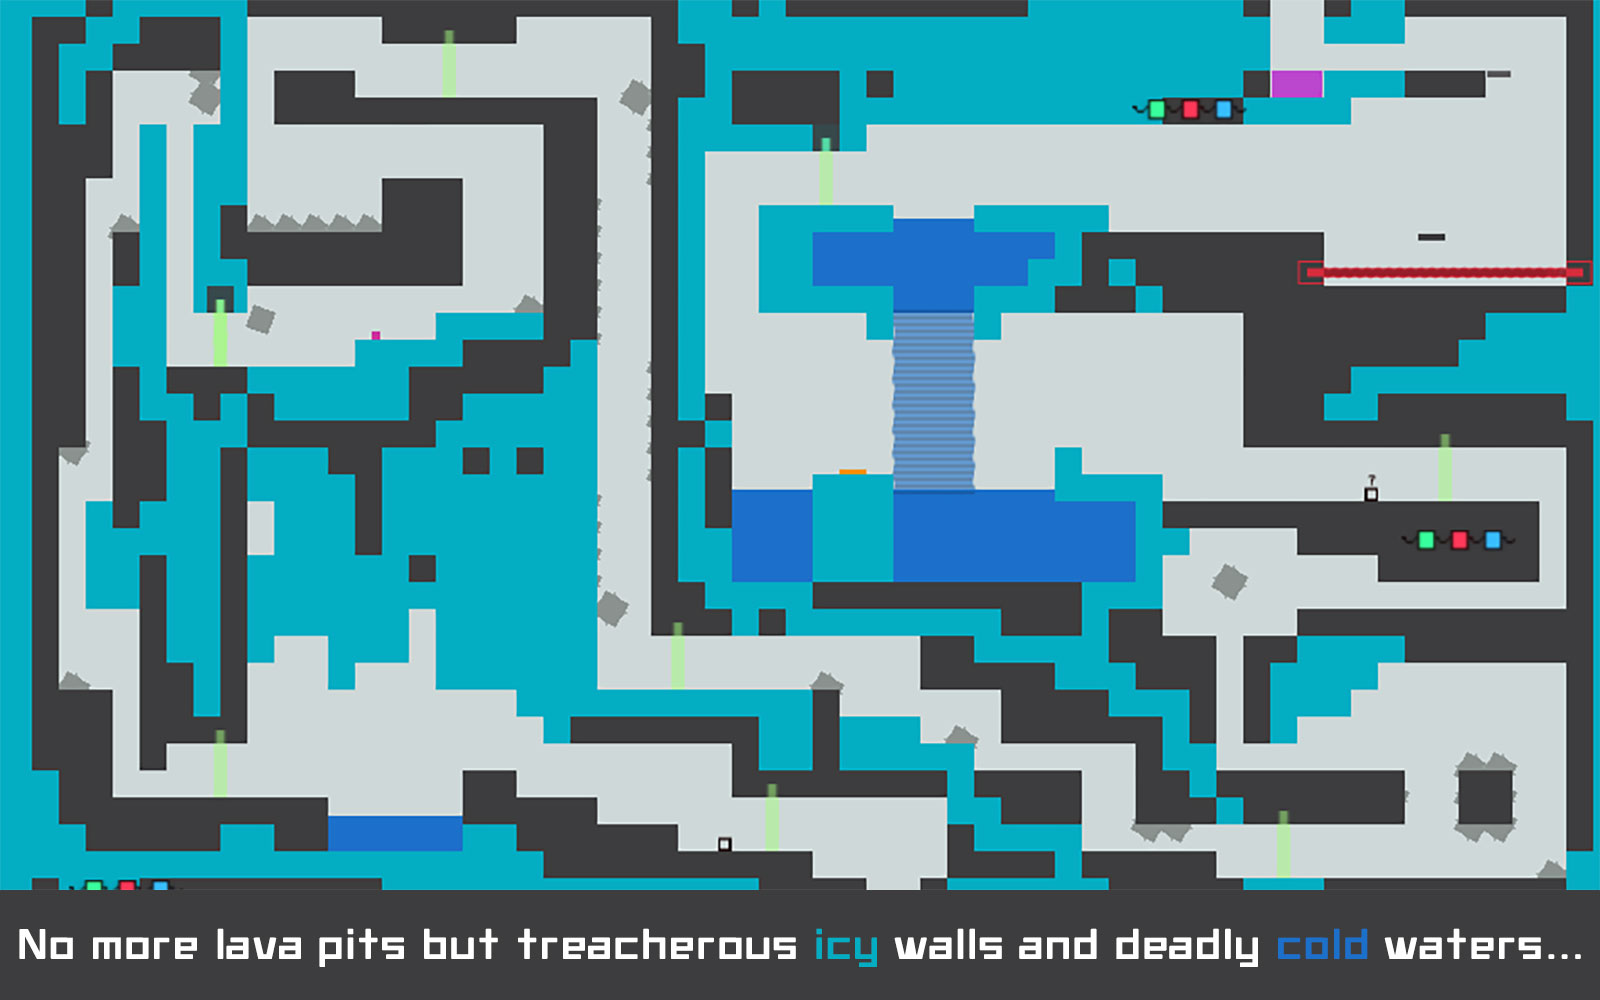 Big ICE Tower Tiny Square Free by EvilObjective